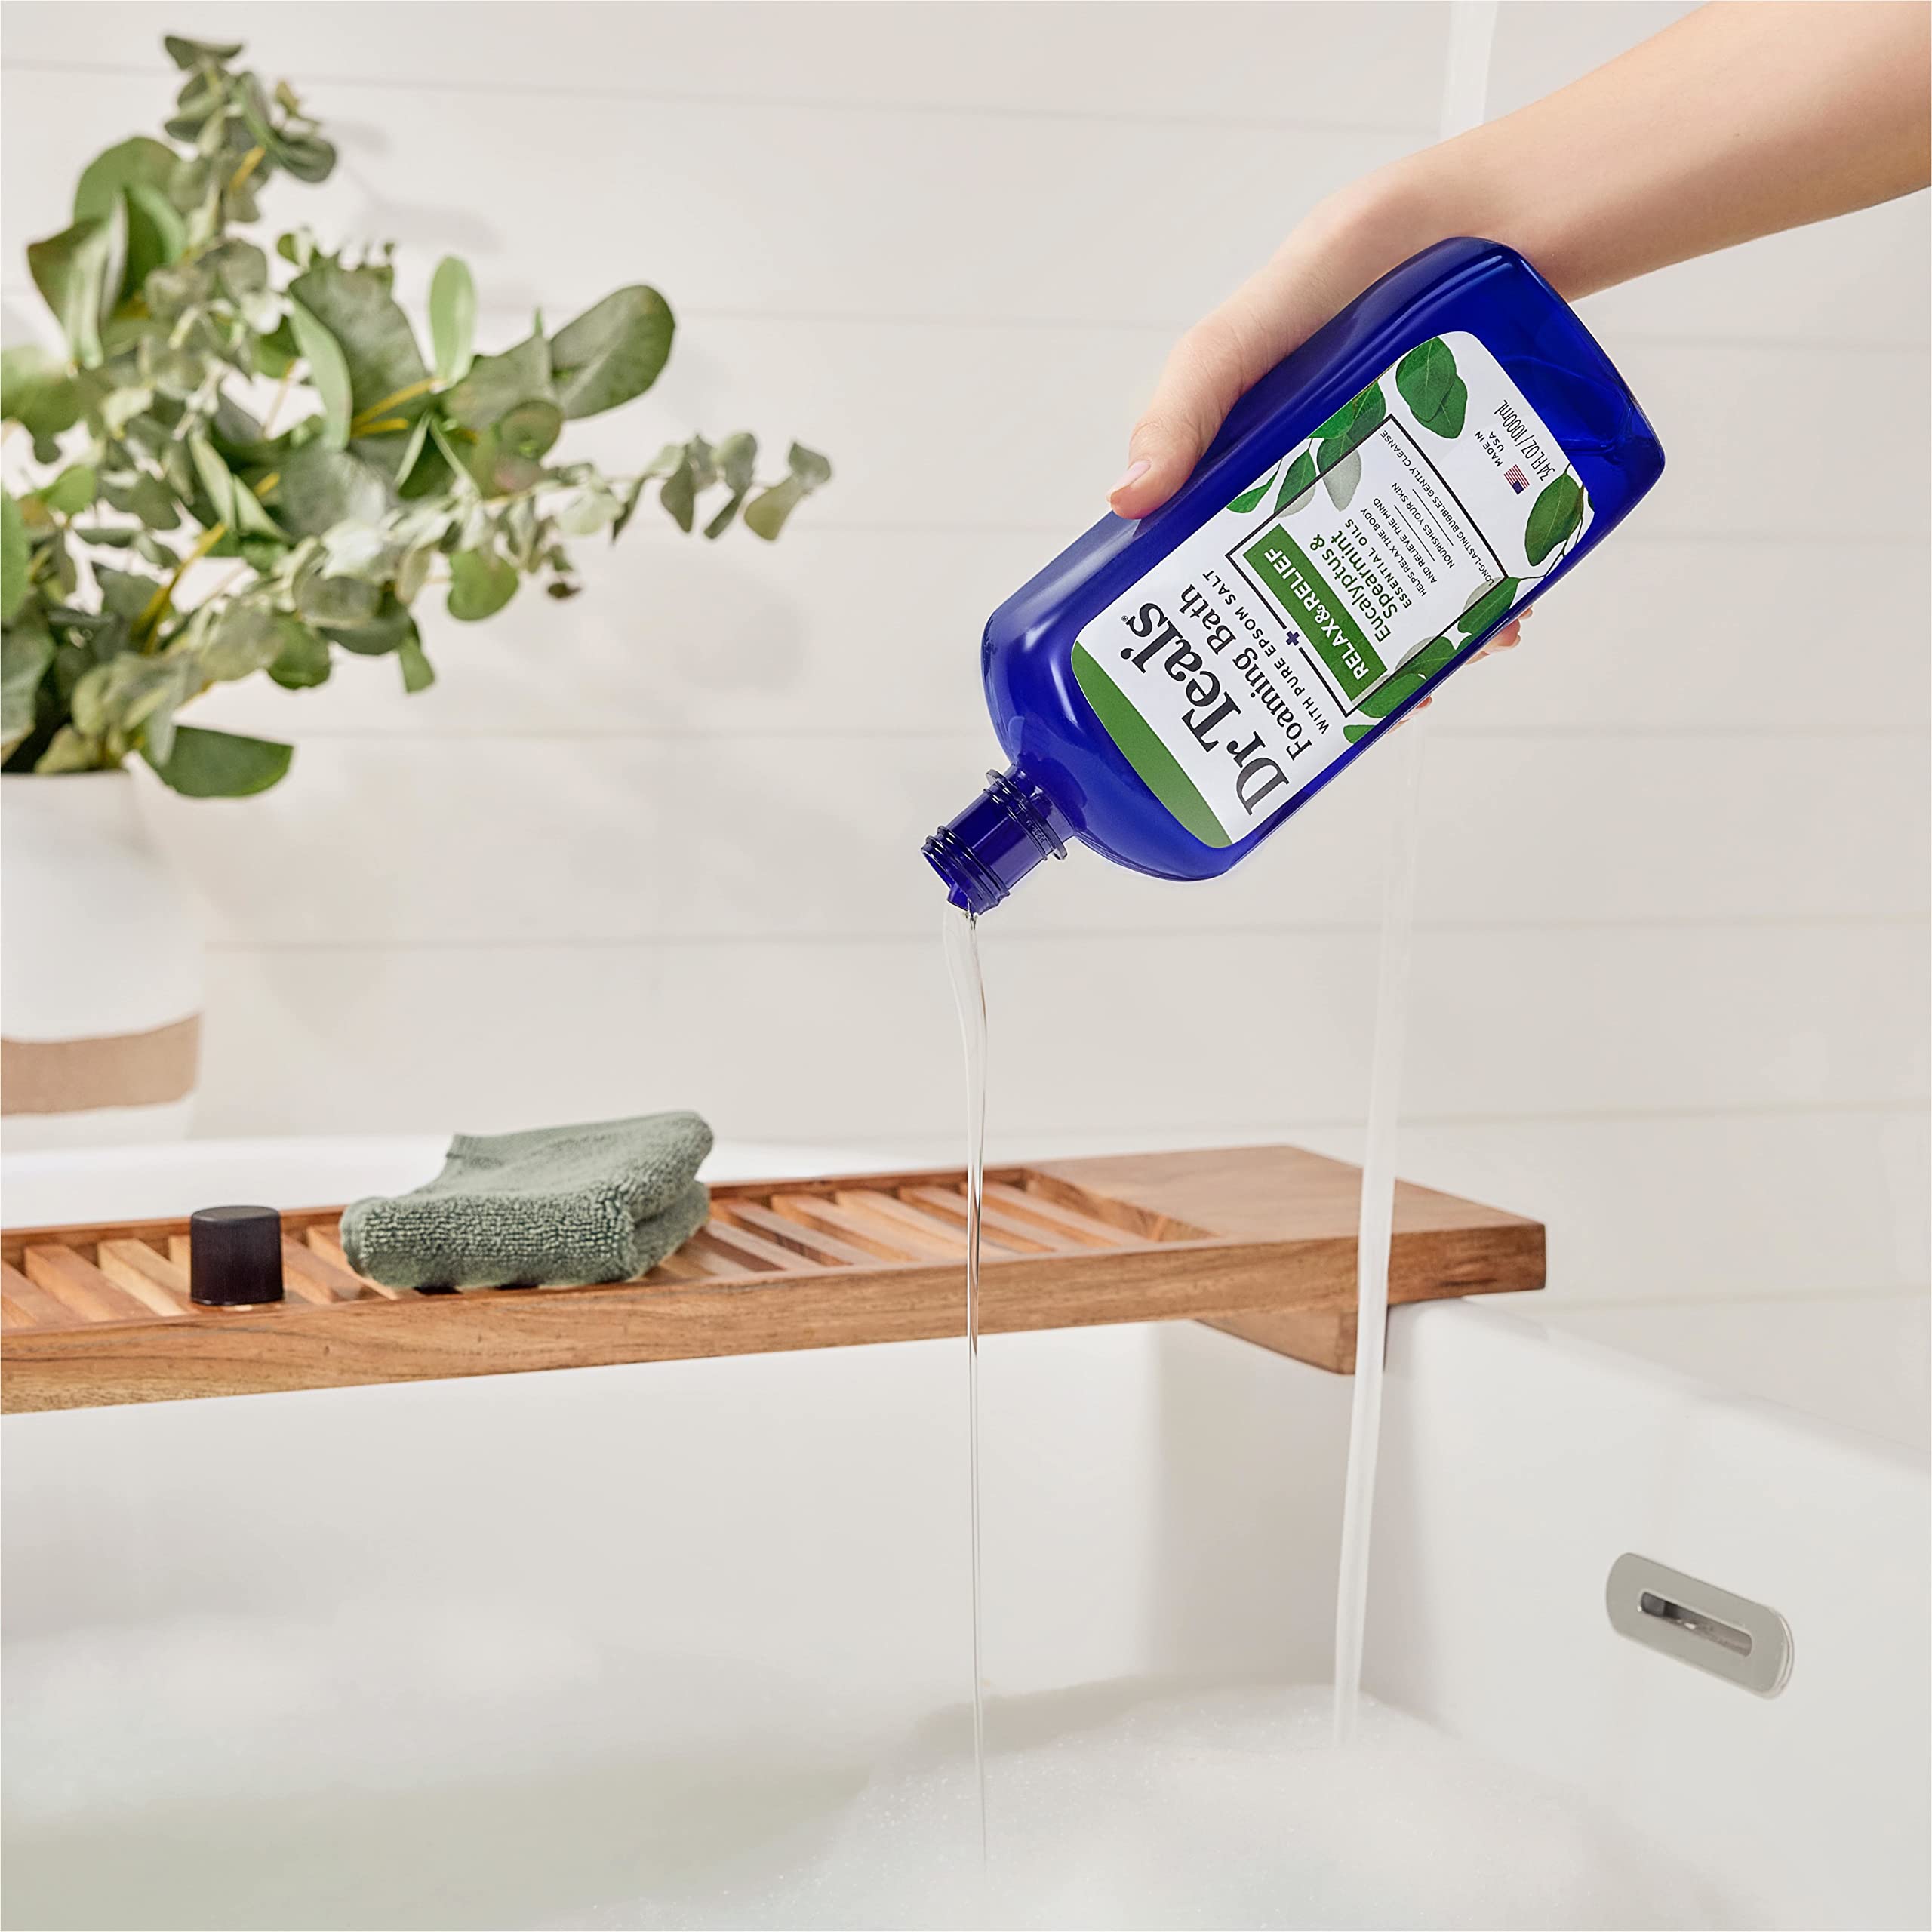 Dr Teal's Foaming Bath with Pure Epsom Salt, Relax & Relief with Eucalyptus & Spearmint, 34 fl oz (Packaging May Vary)